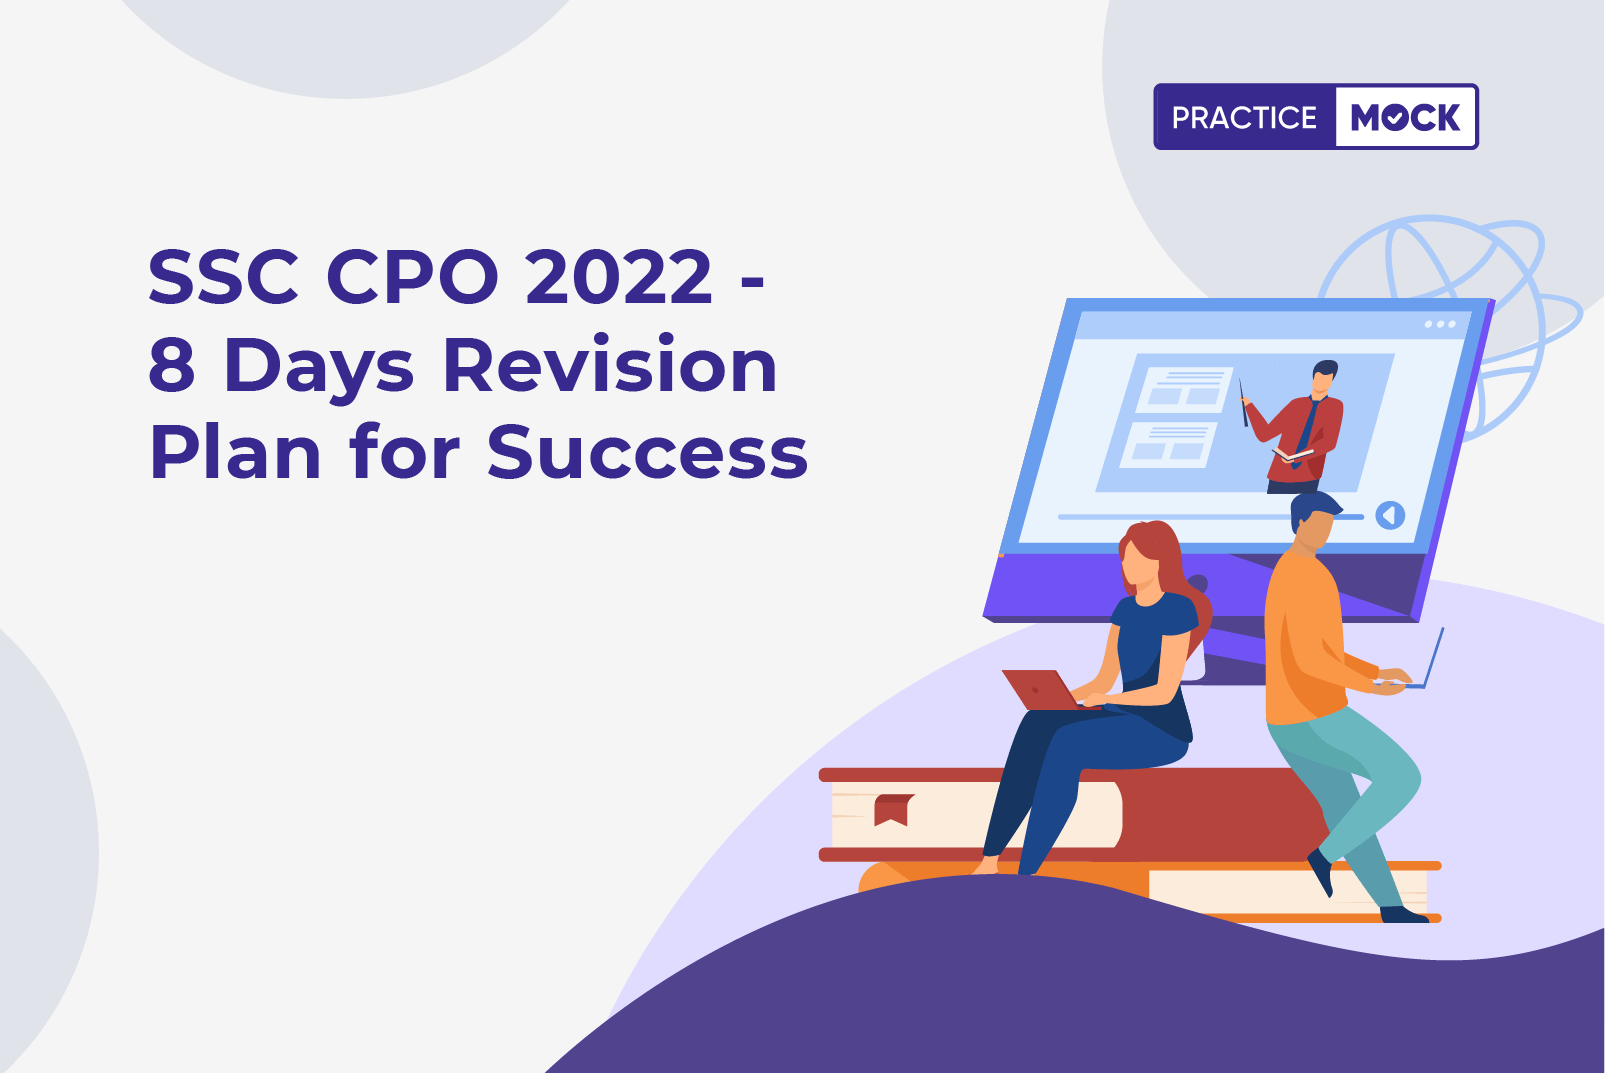 SSC CPO 2022-8 Days Revision Plan for Success